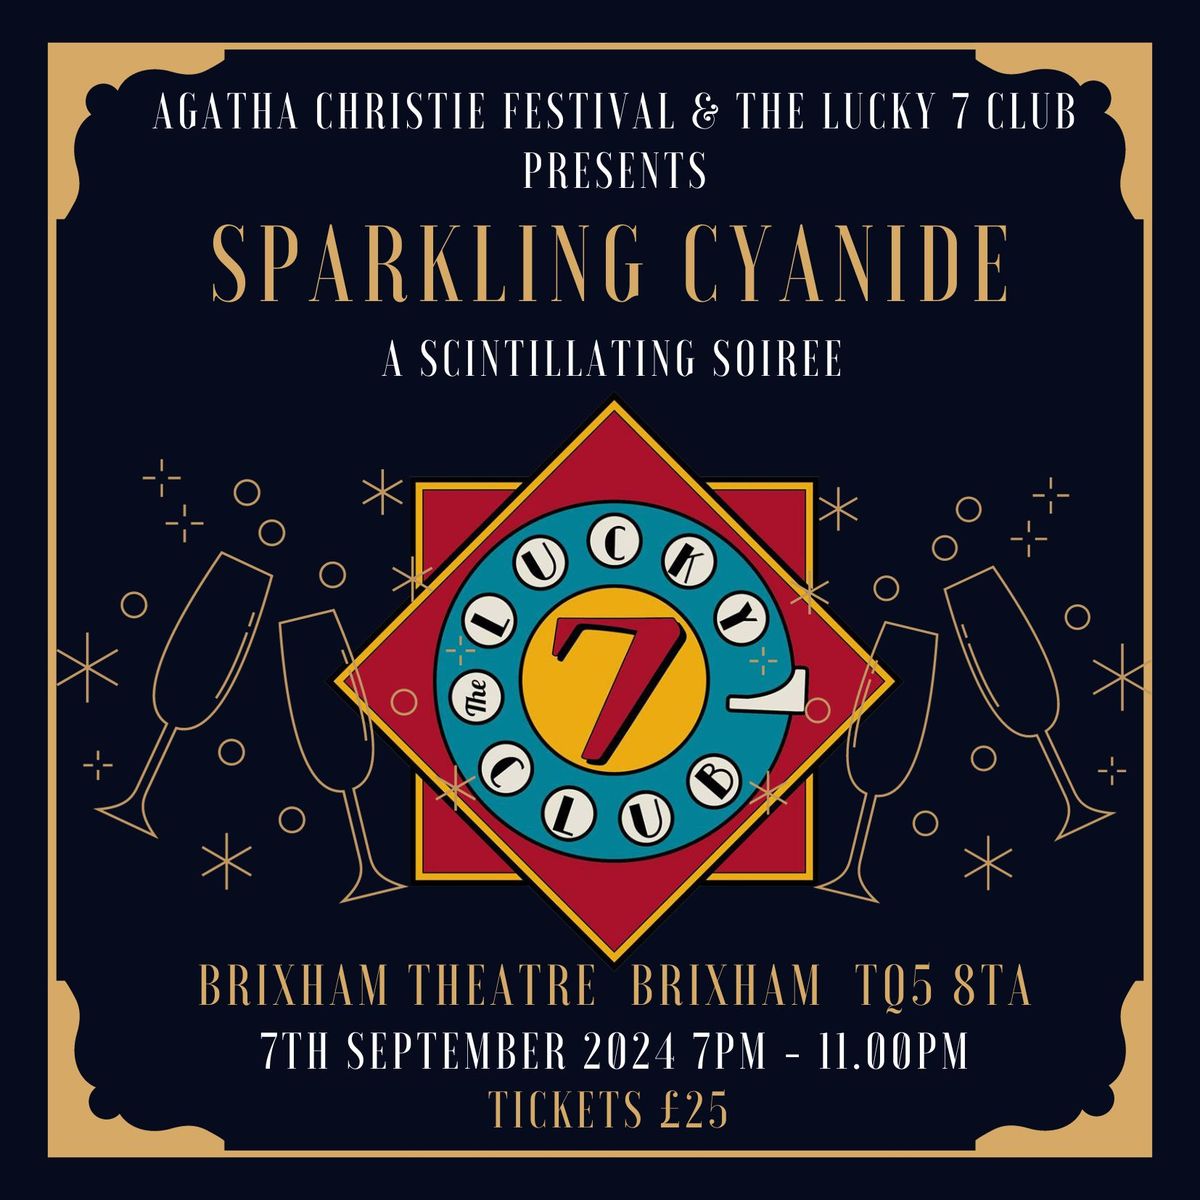 The Lucky 7 Club presents Sparkling Cyanide - A Scintillating Soiree!